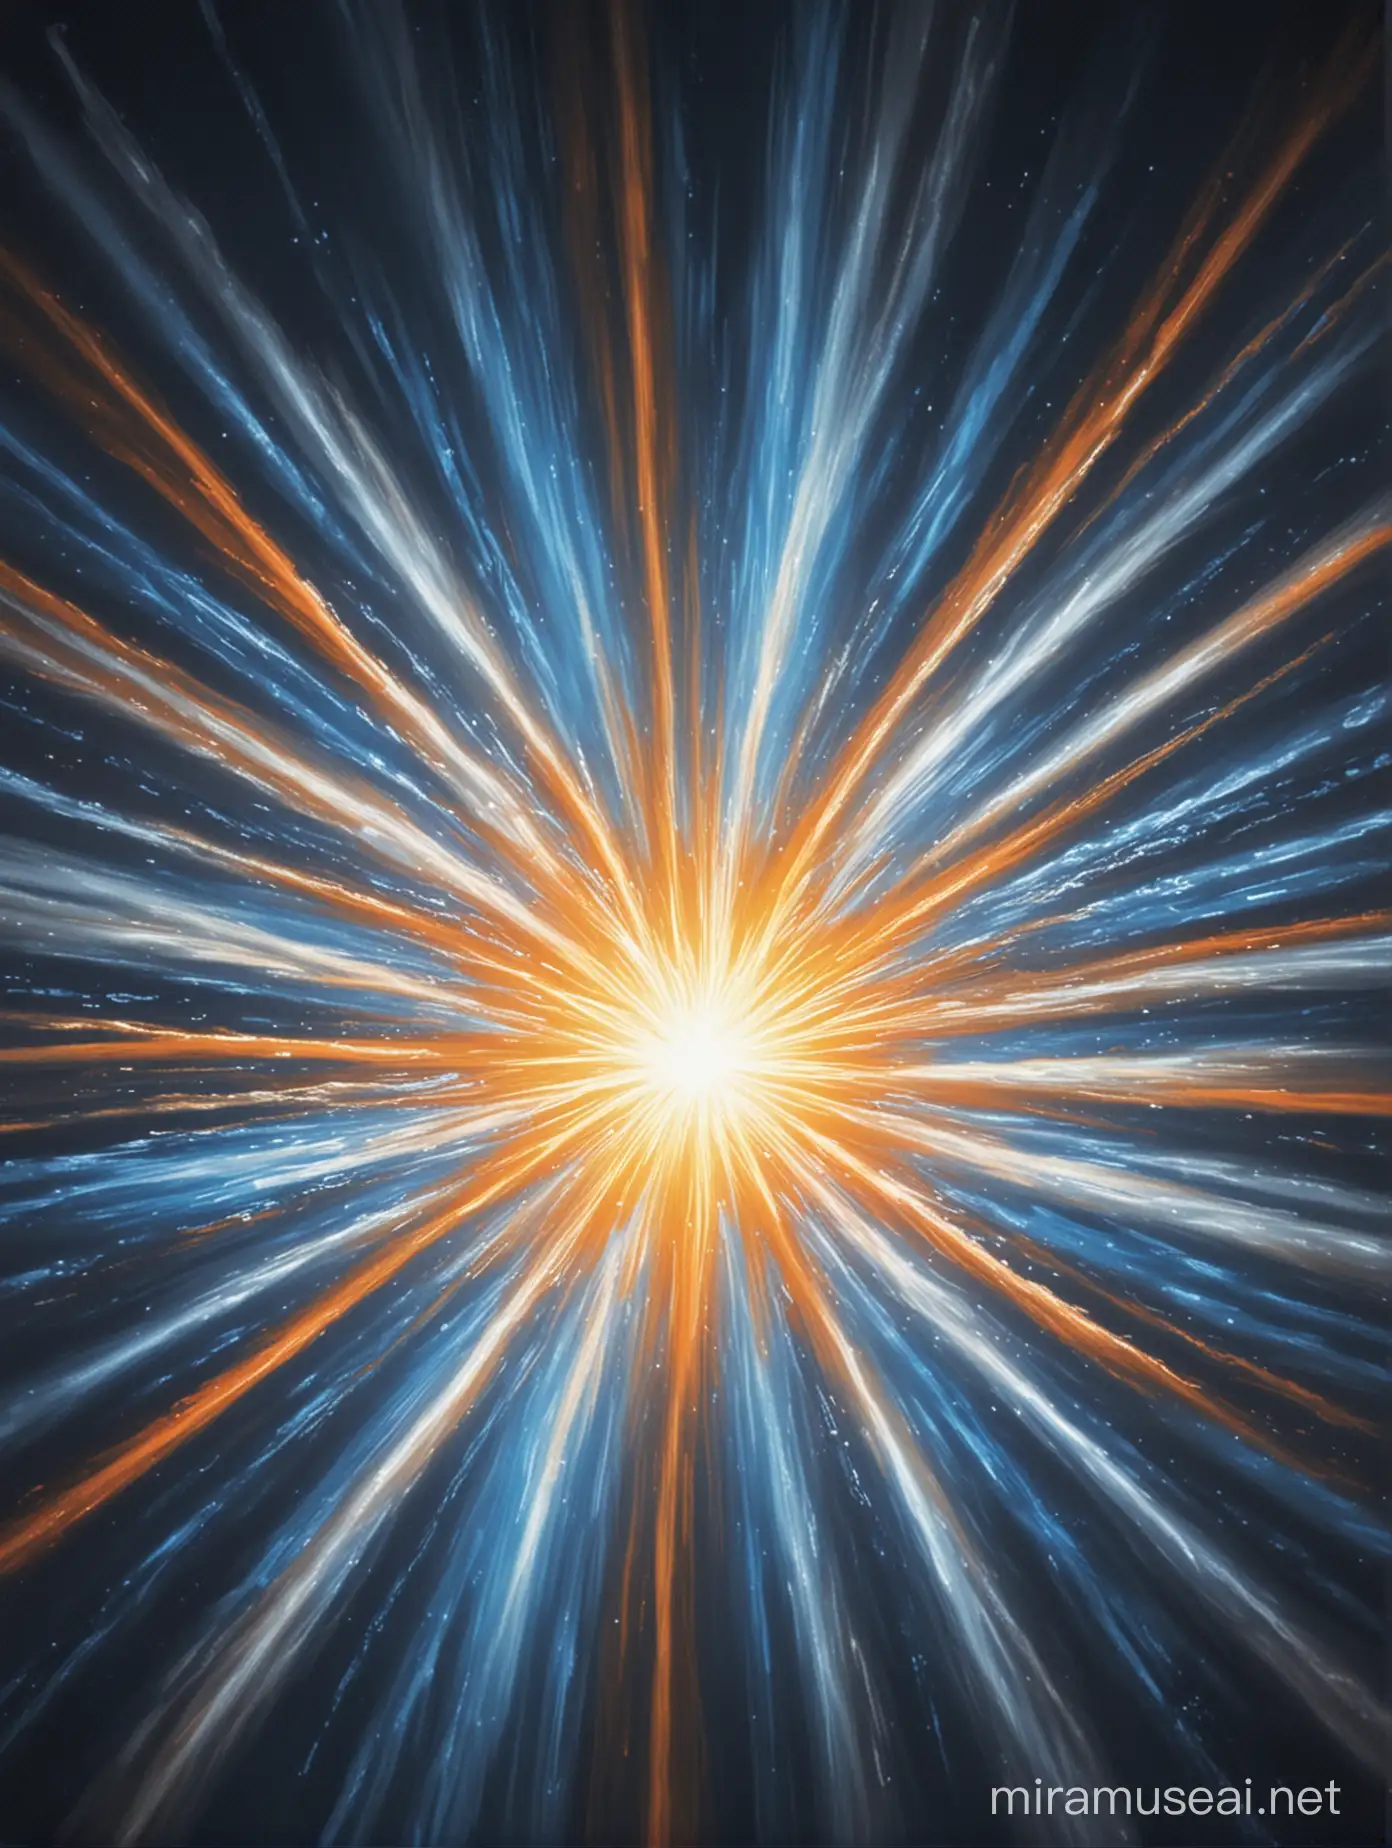 Create an image of of a burst of light that is concentrated at the center. Use bright orange, blue and white as the colors. 
